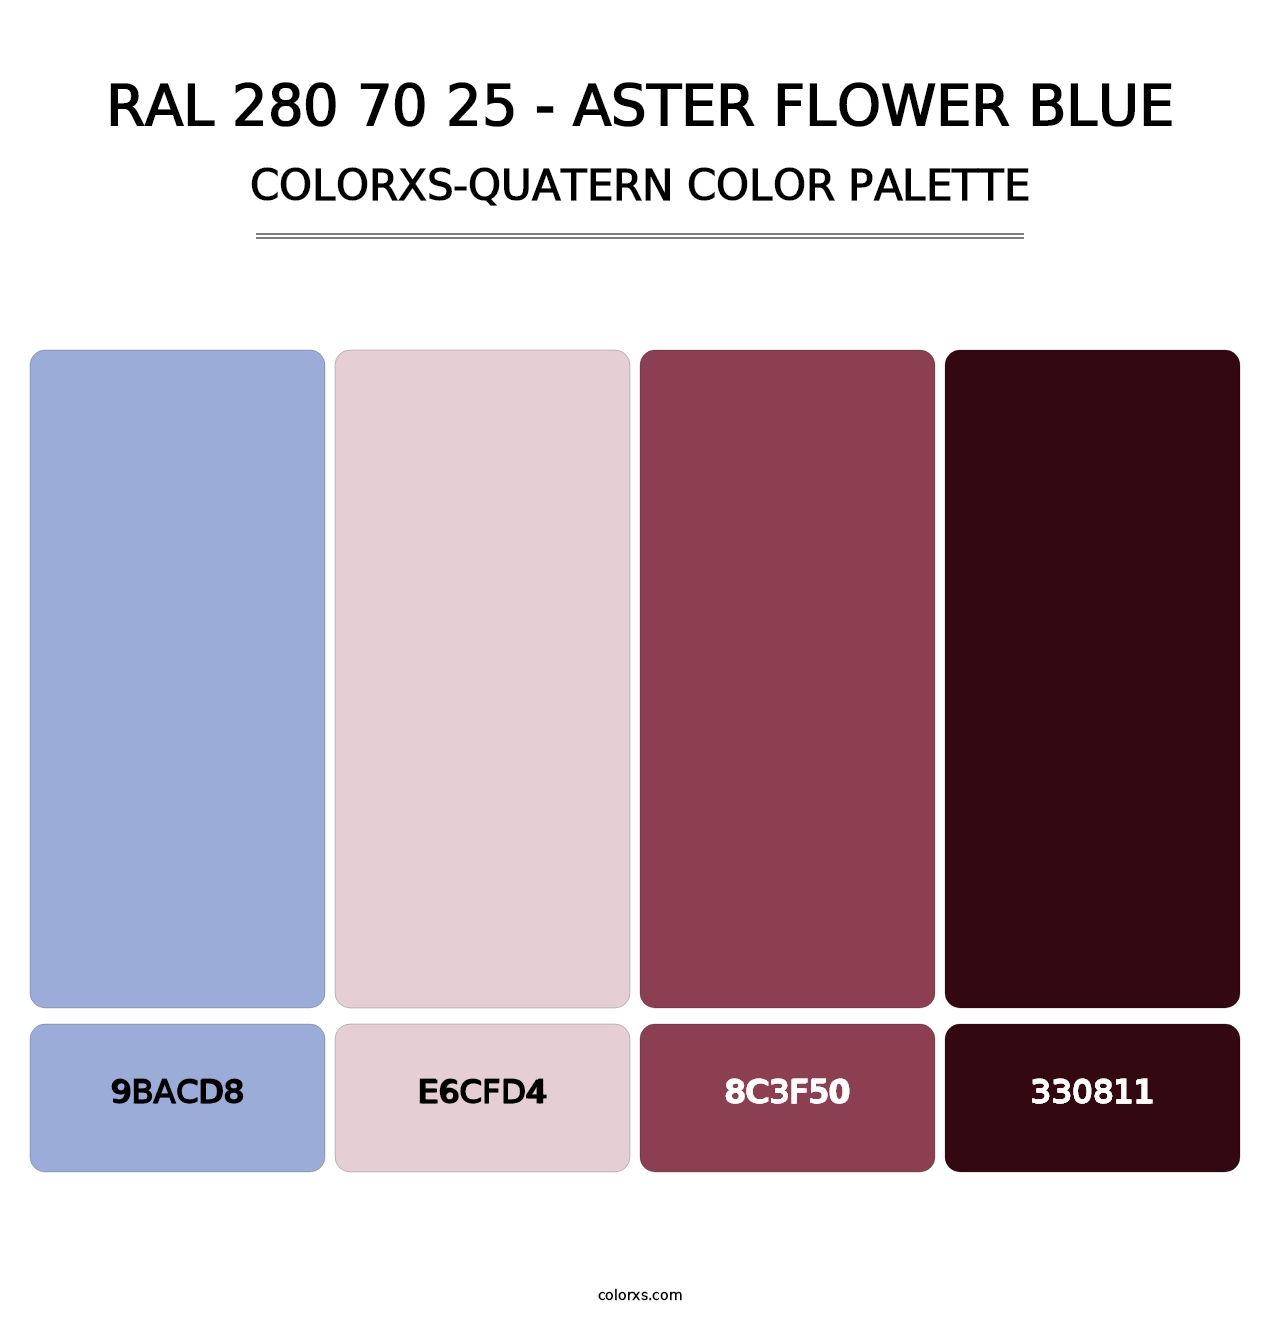 RAL 280 70 25 - Aster Flower Blue - Colorxs Quatern Palette